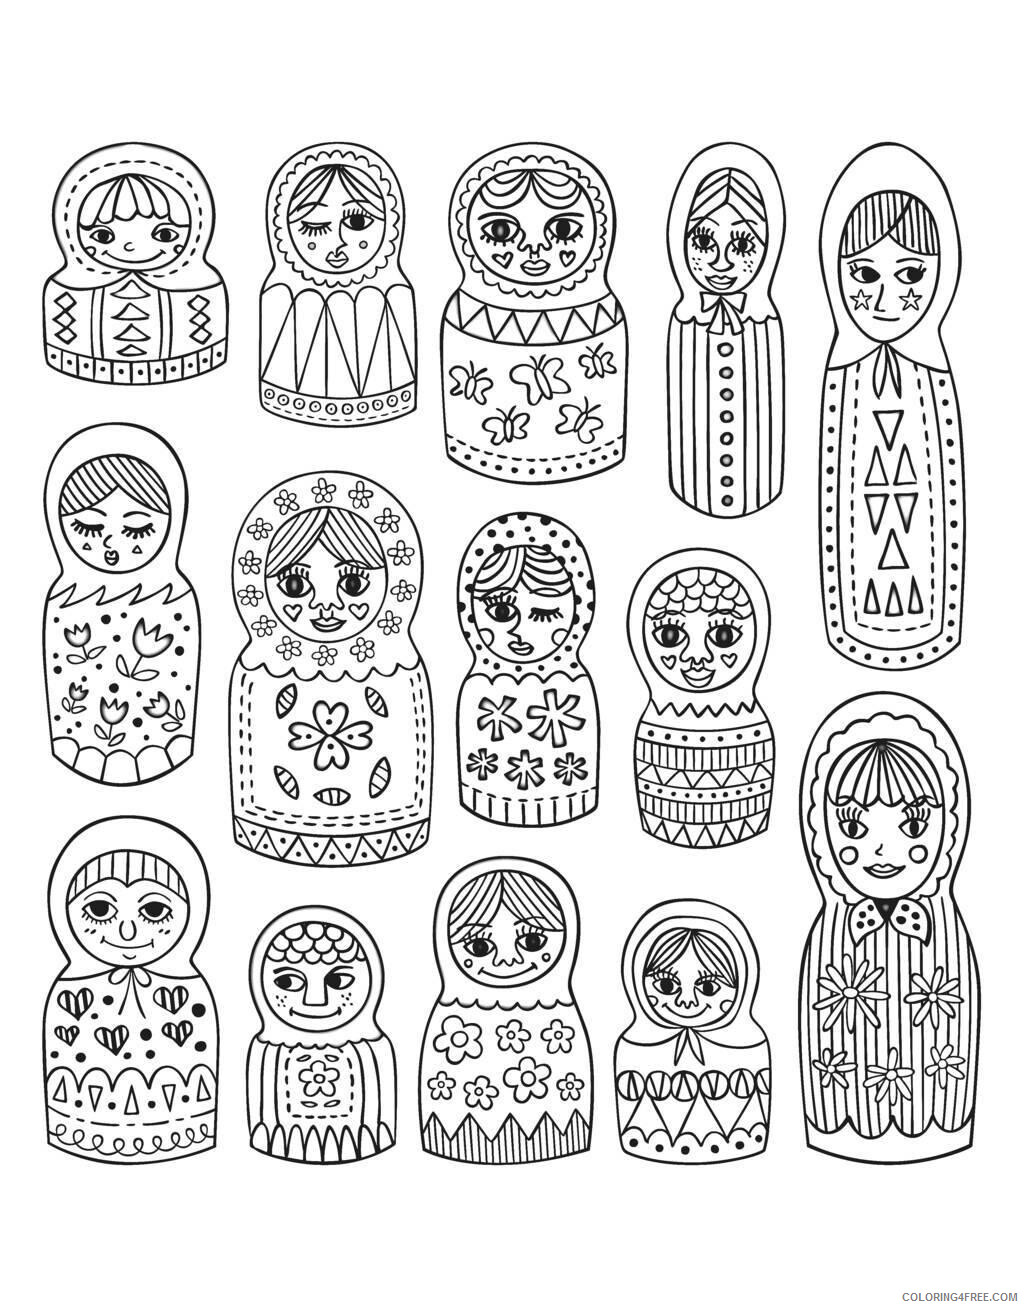 Doll Coloring Pages for Girls Russian Dolls Printable 2021 0407 Coloring4free